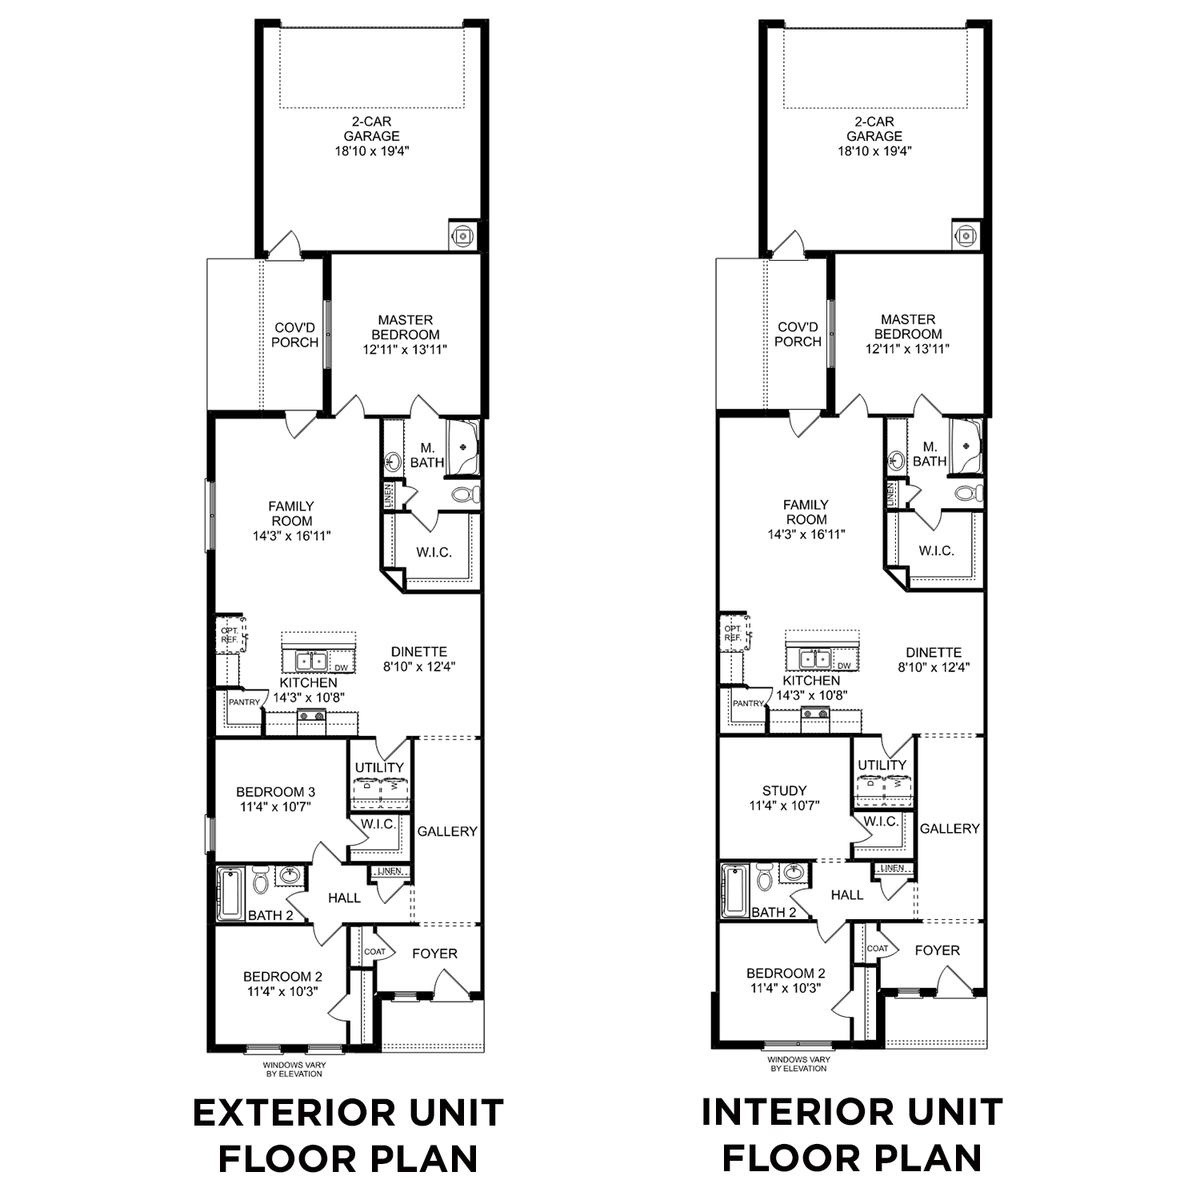 1 - The Camilla A floor plan layout for 415 Ronnie Drive in Davidson Homes' Cain Park community.